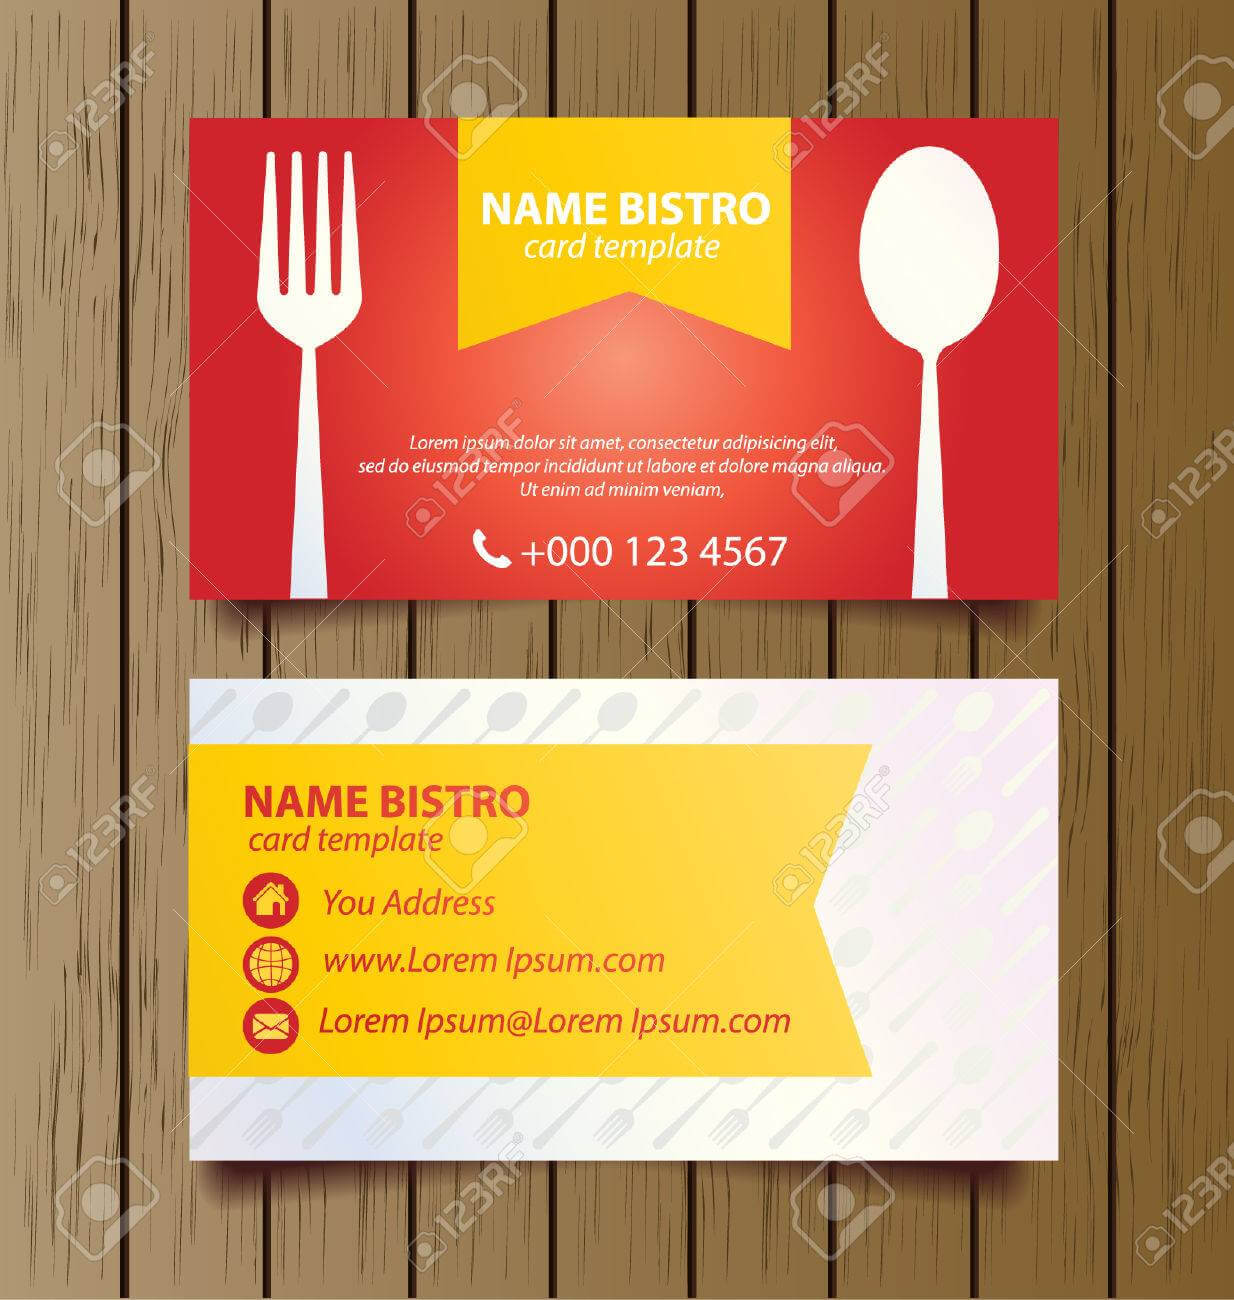 Business Card Template For Restaurant Business Vector With Restaurant Business Cards Templates Free